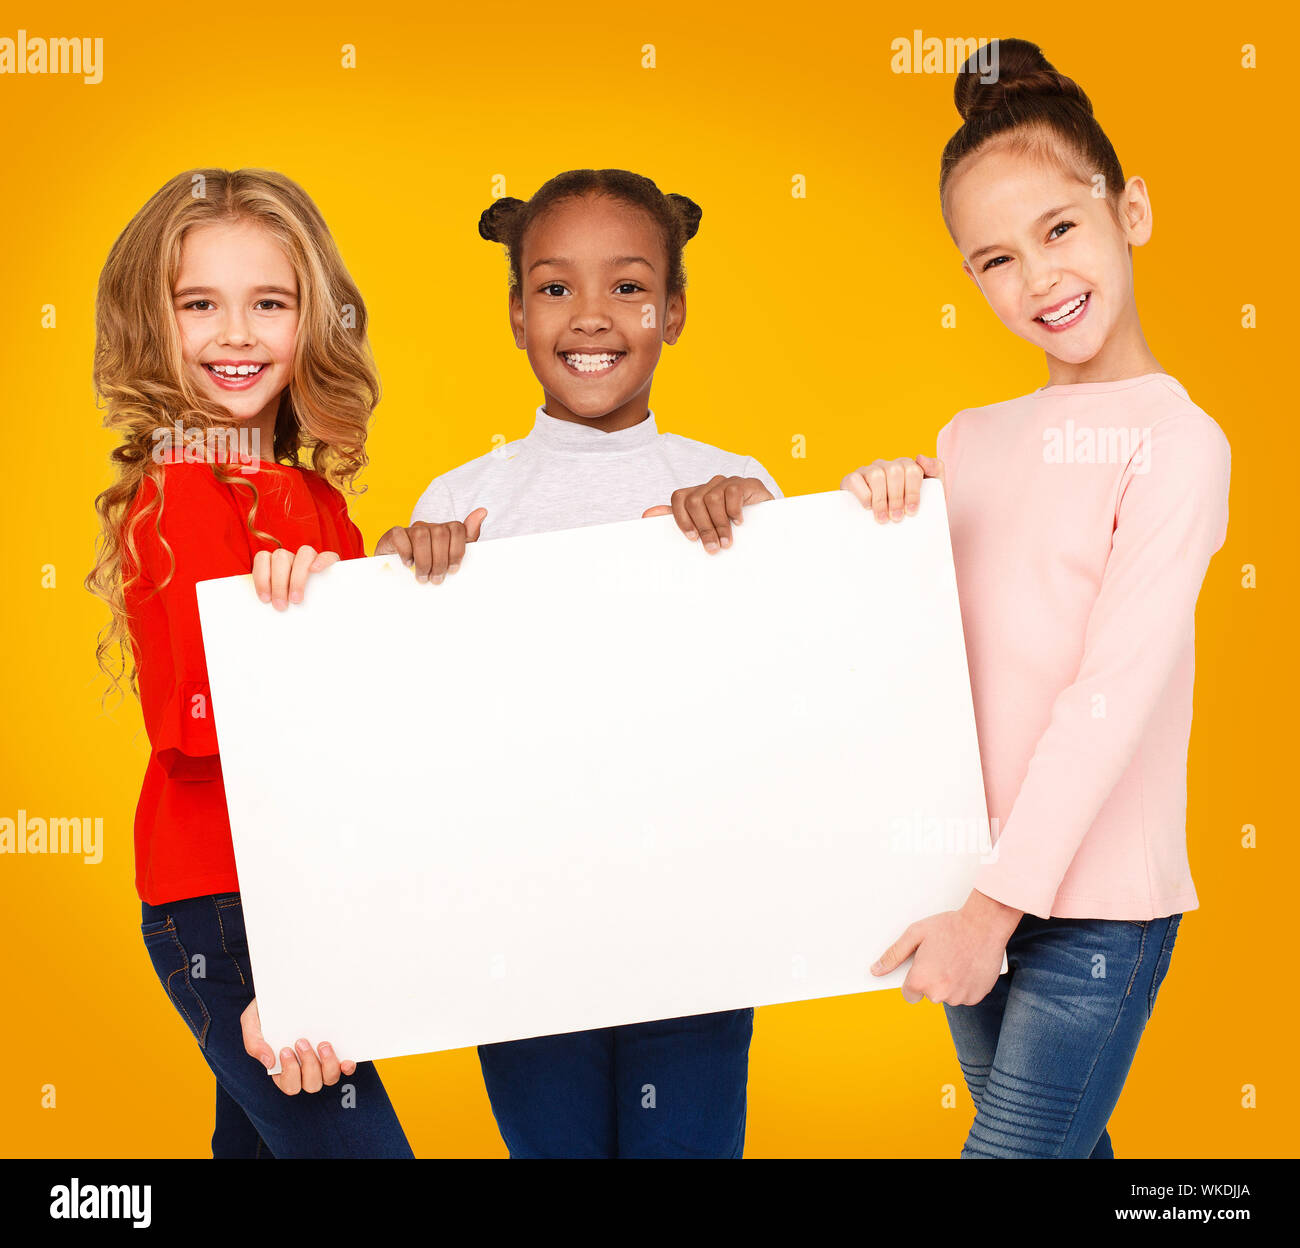 School girls holding blank paper banner for announcement Stock Photo